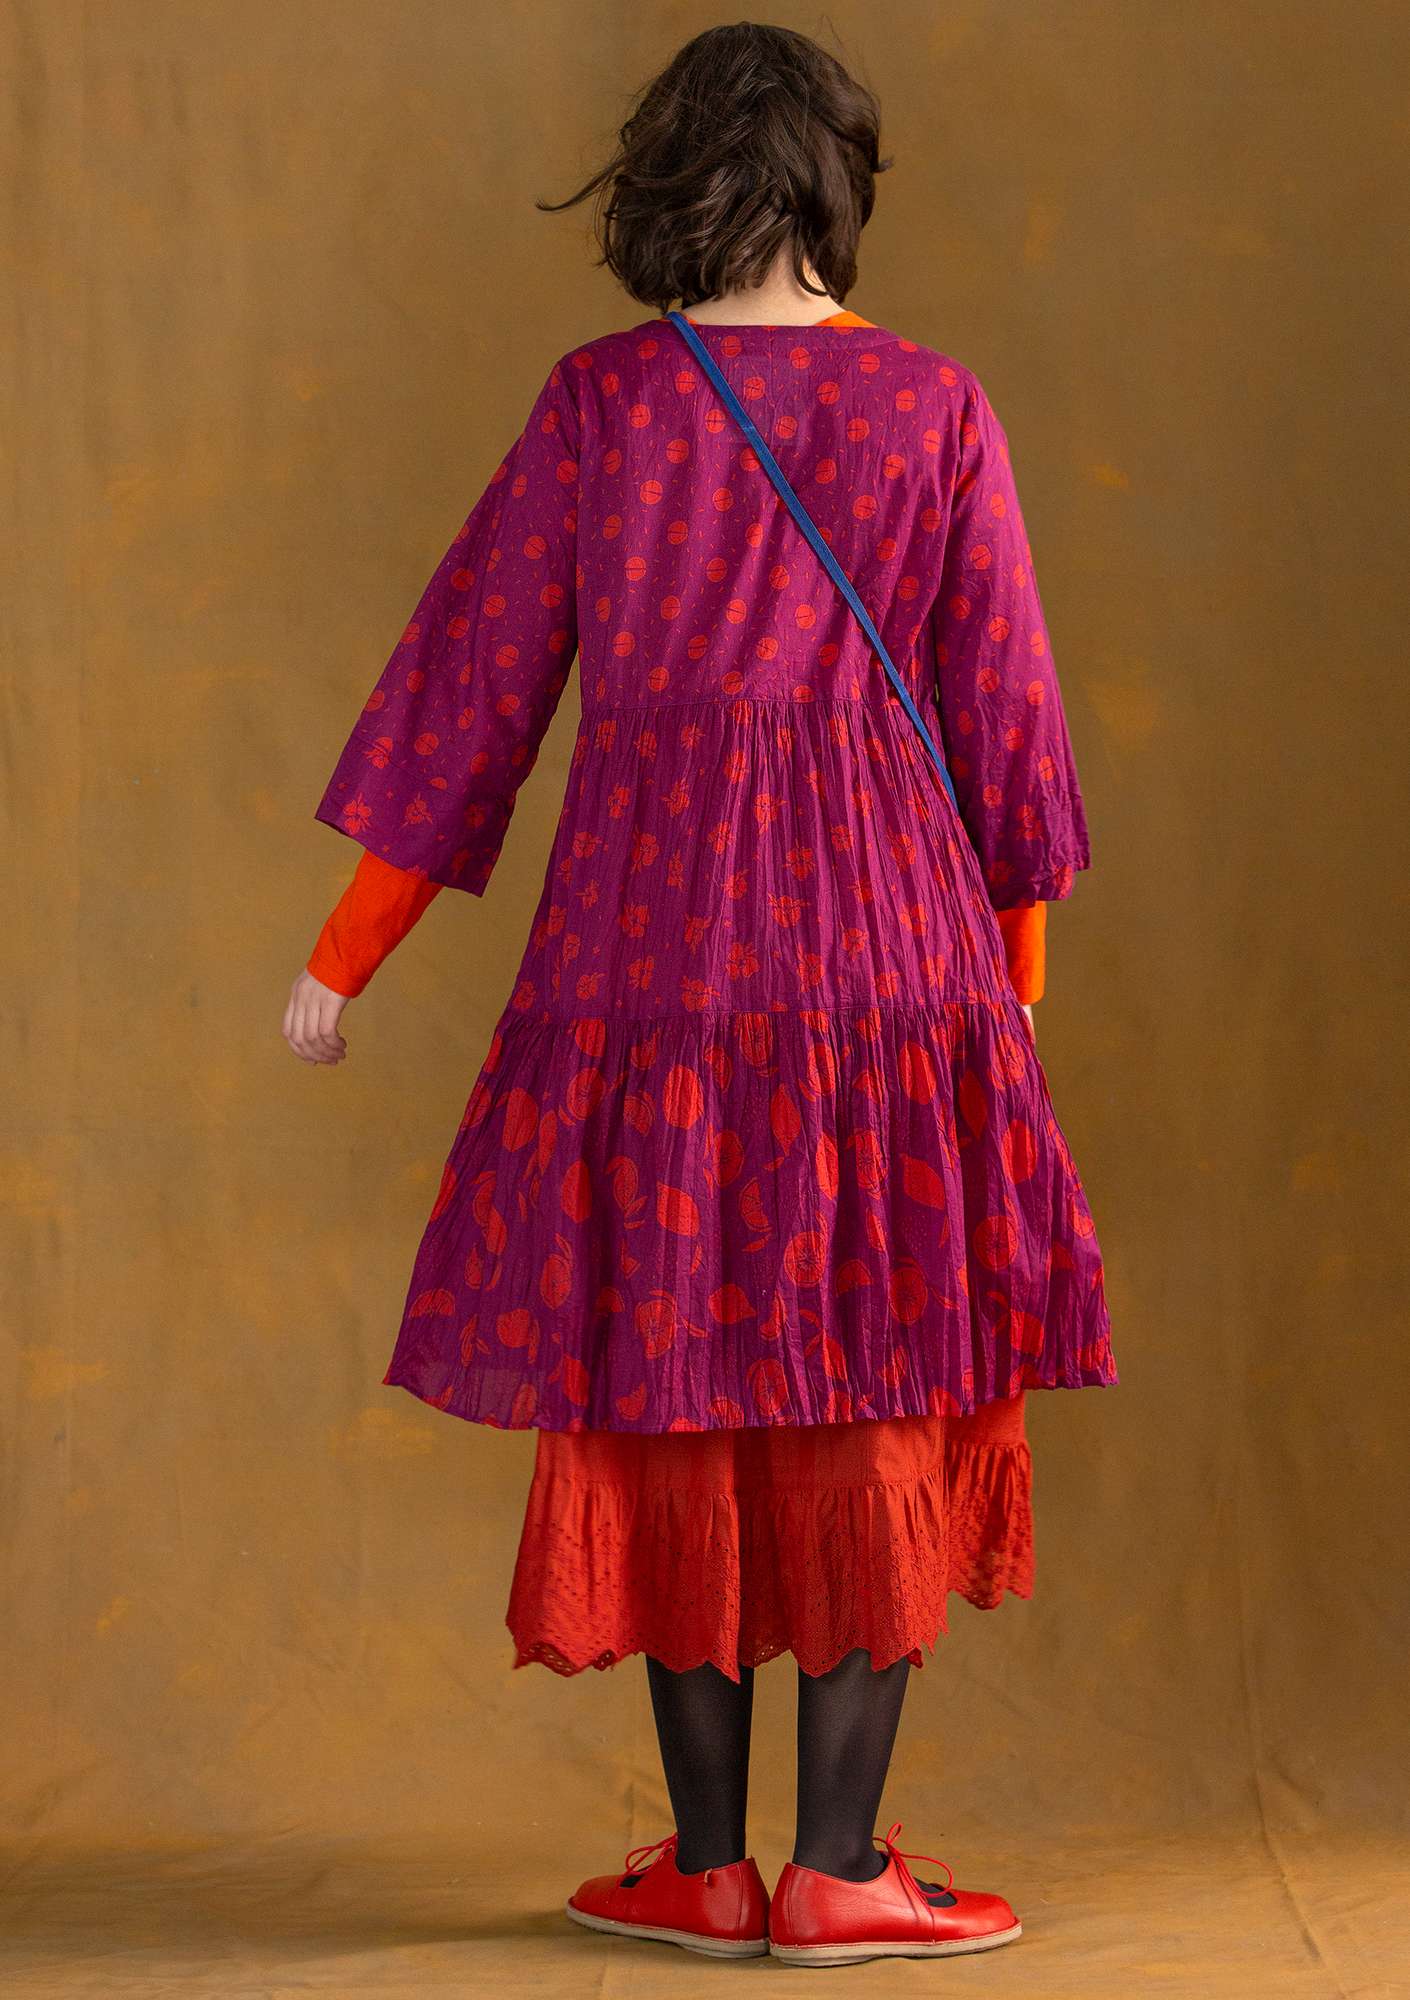 “Fruits” dress in woven organic/recycled cotton grape/patterned thumbnail